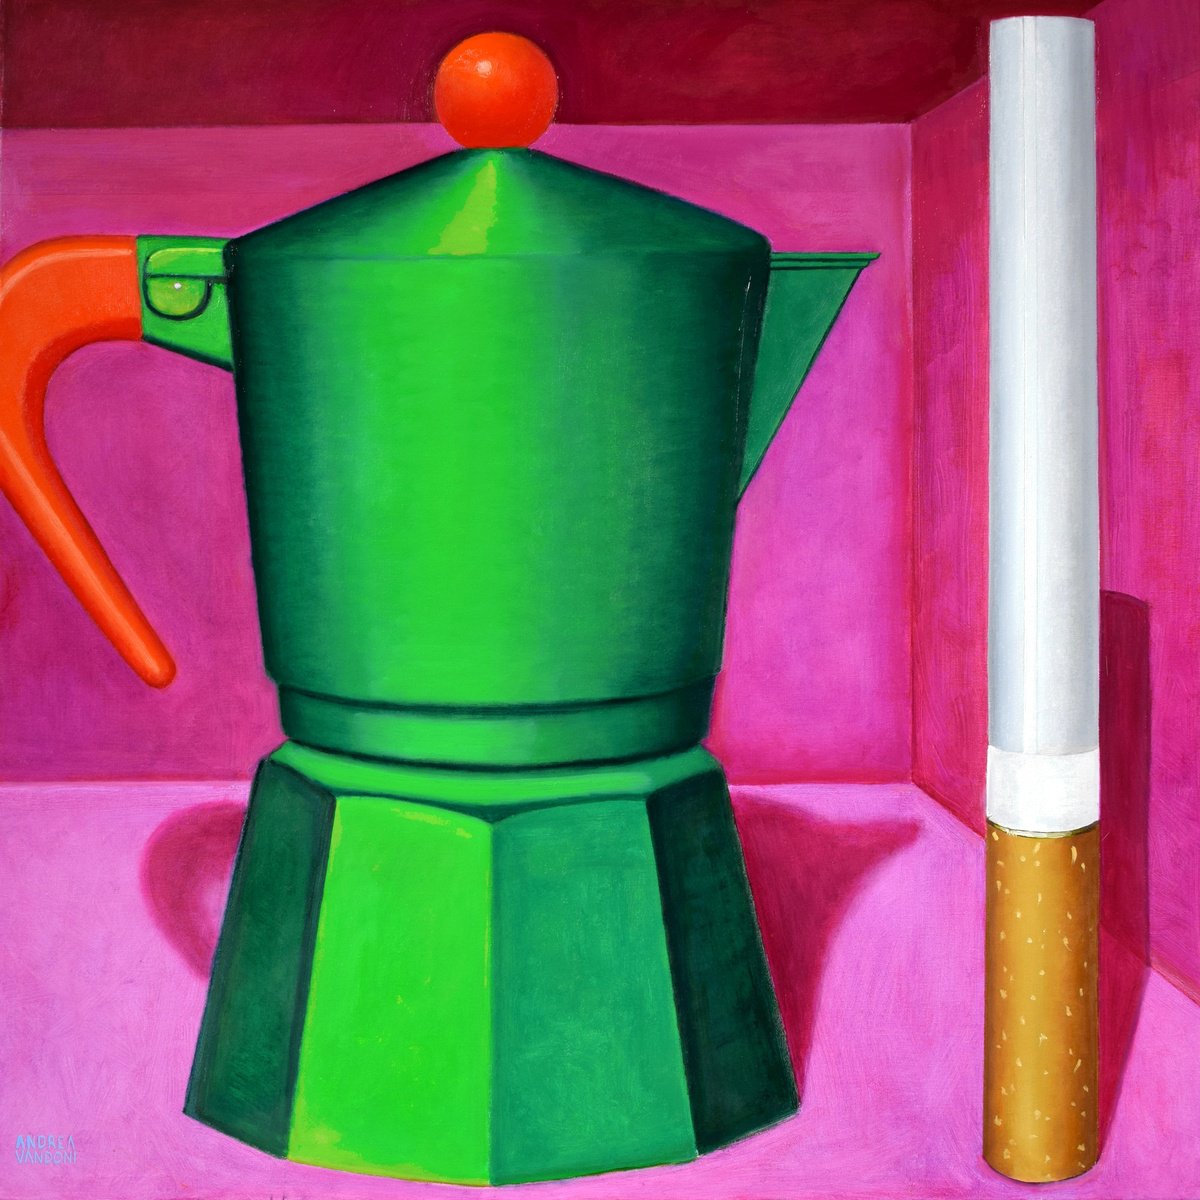 COFFEE AND CIGARETTE - 9. Large by Andrea Vandoni